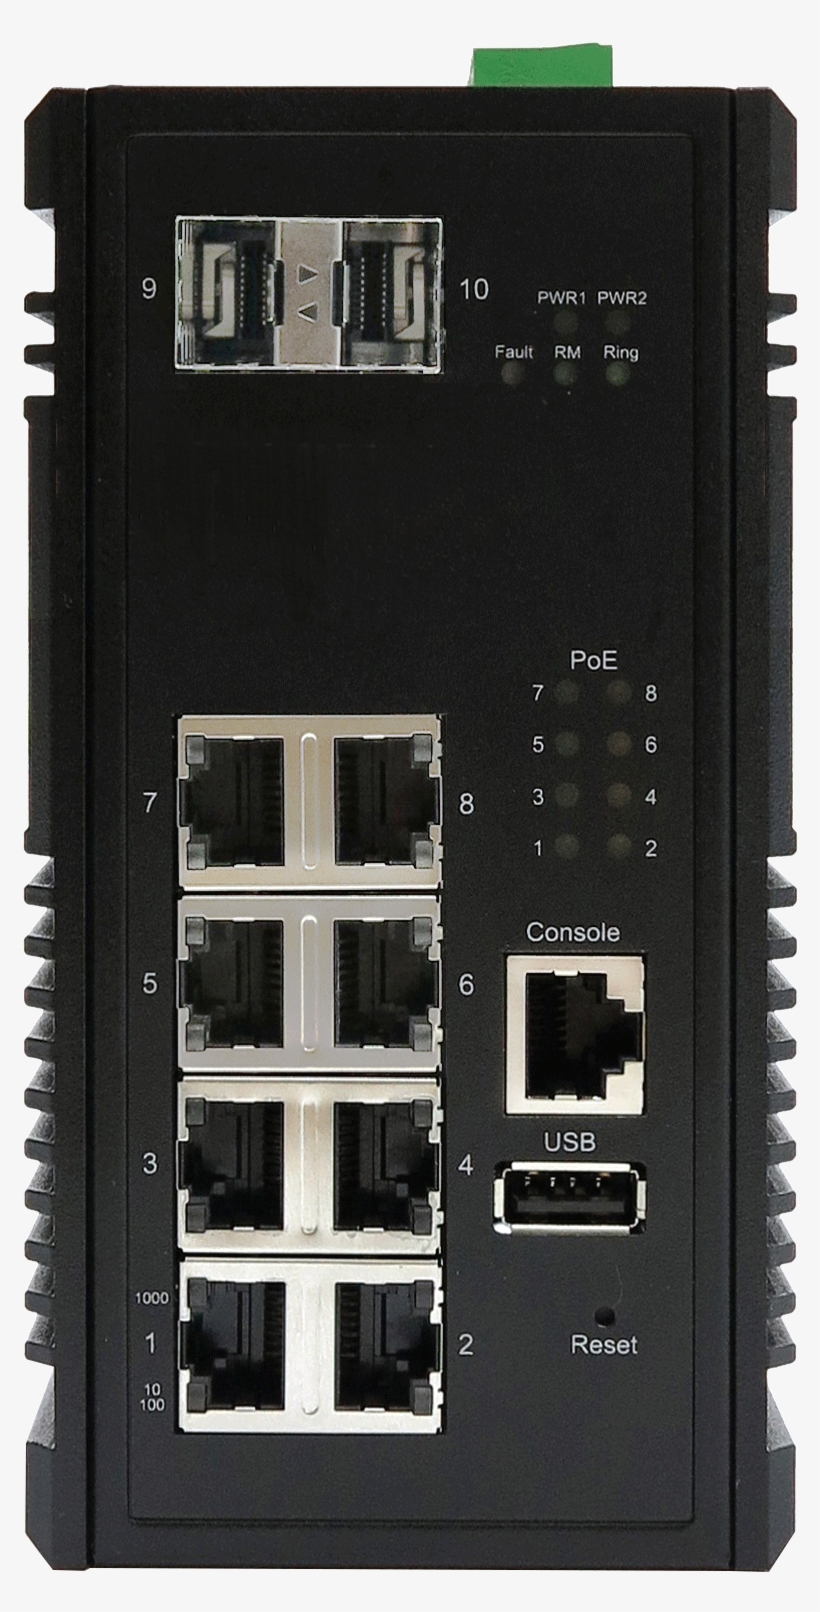 Mp-0802x - Network Switch, transparent png #2860509